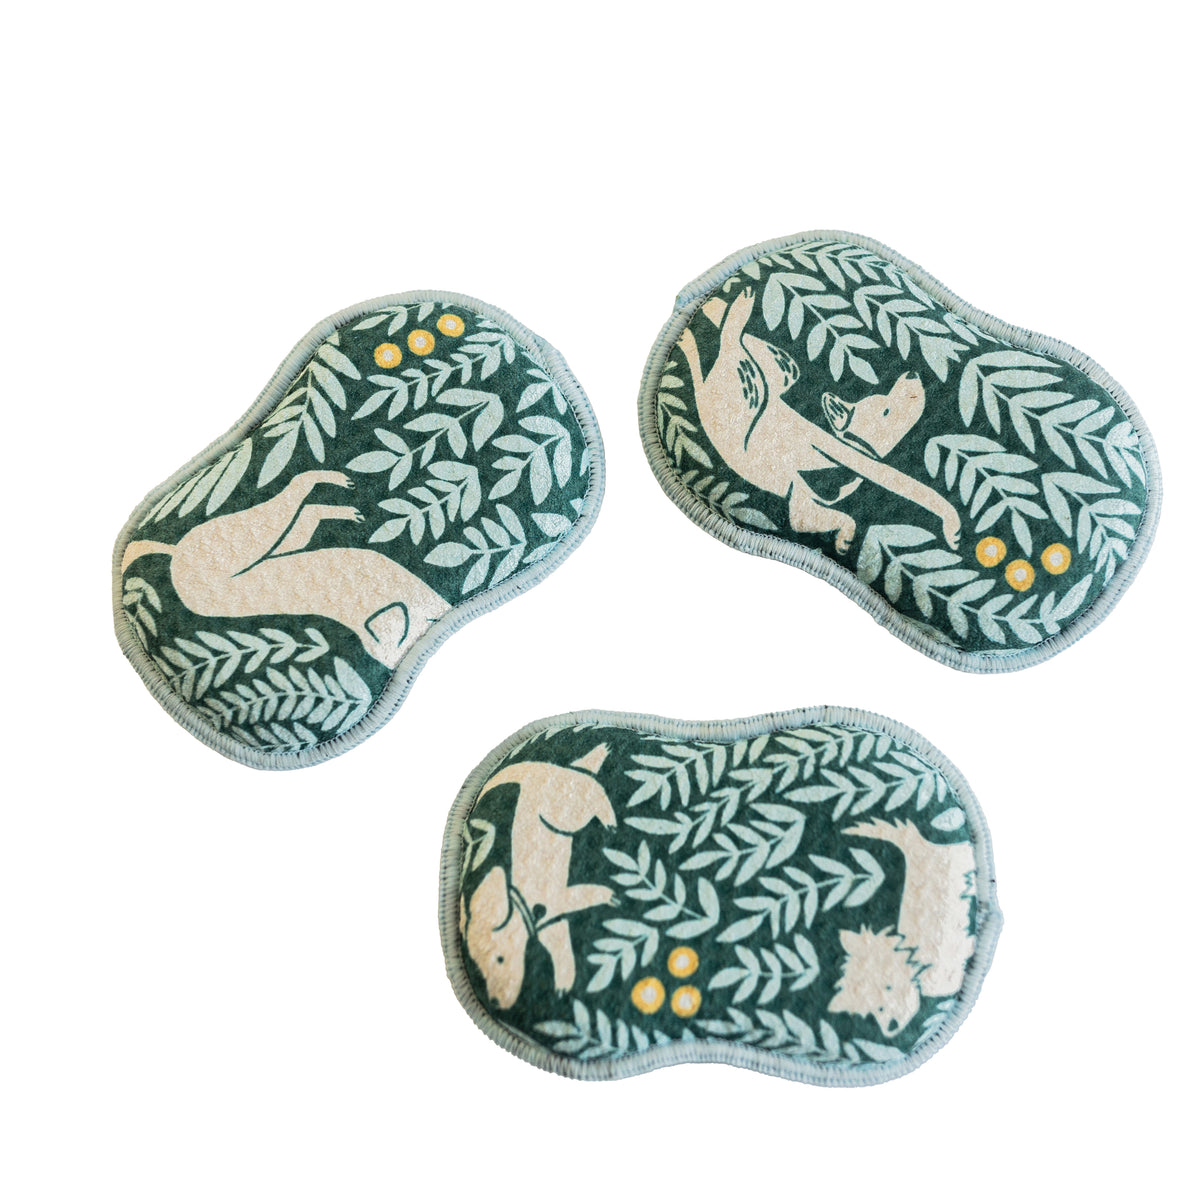 RE:usable Sponges (Set of 3) - Nuthatch Dog Park Sponges &amp; Scouring Pads Once Again Home Co. Teal  